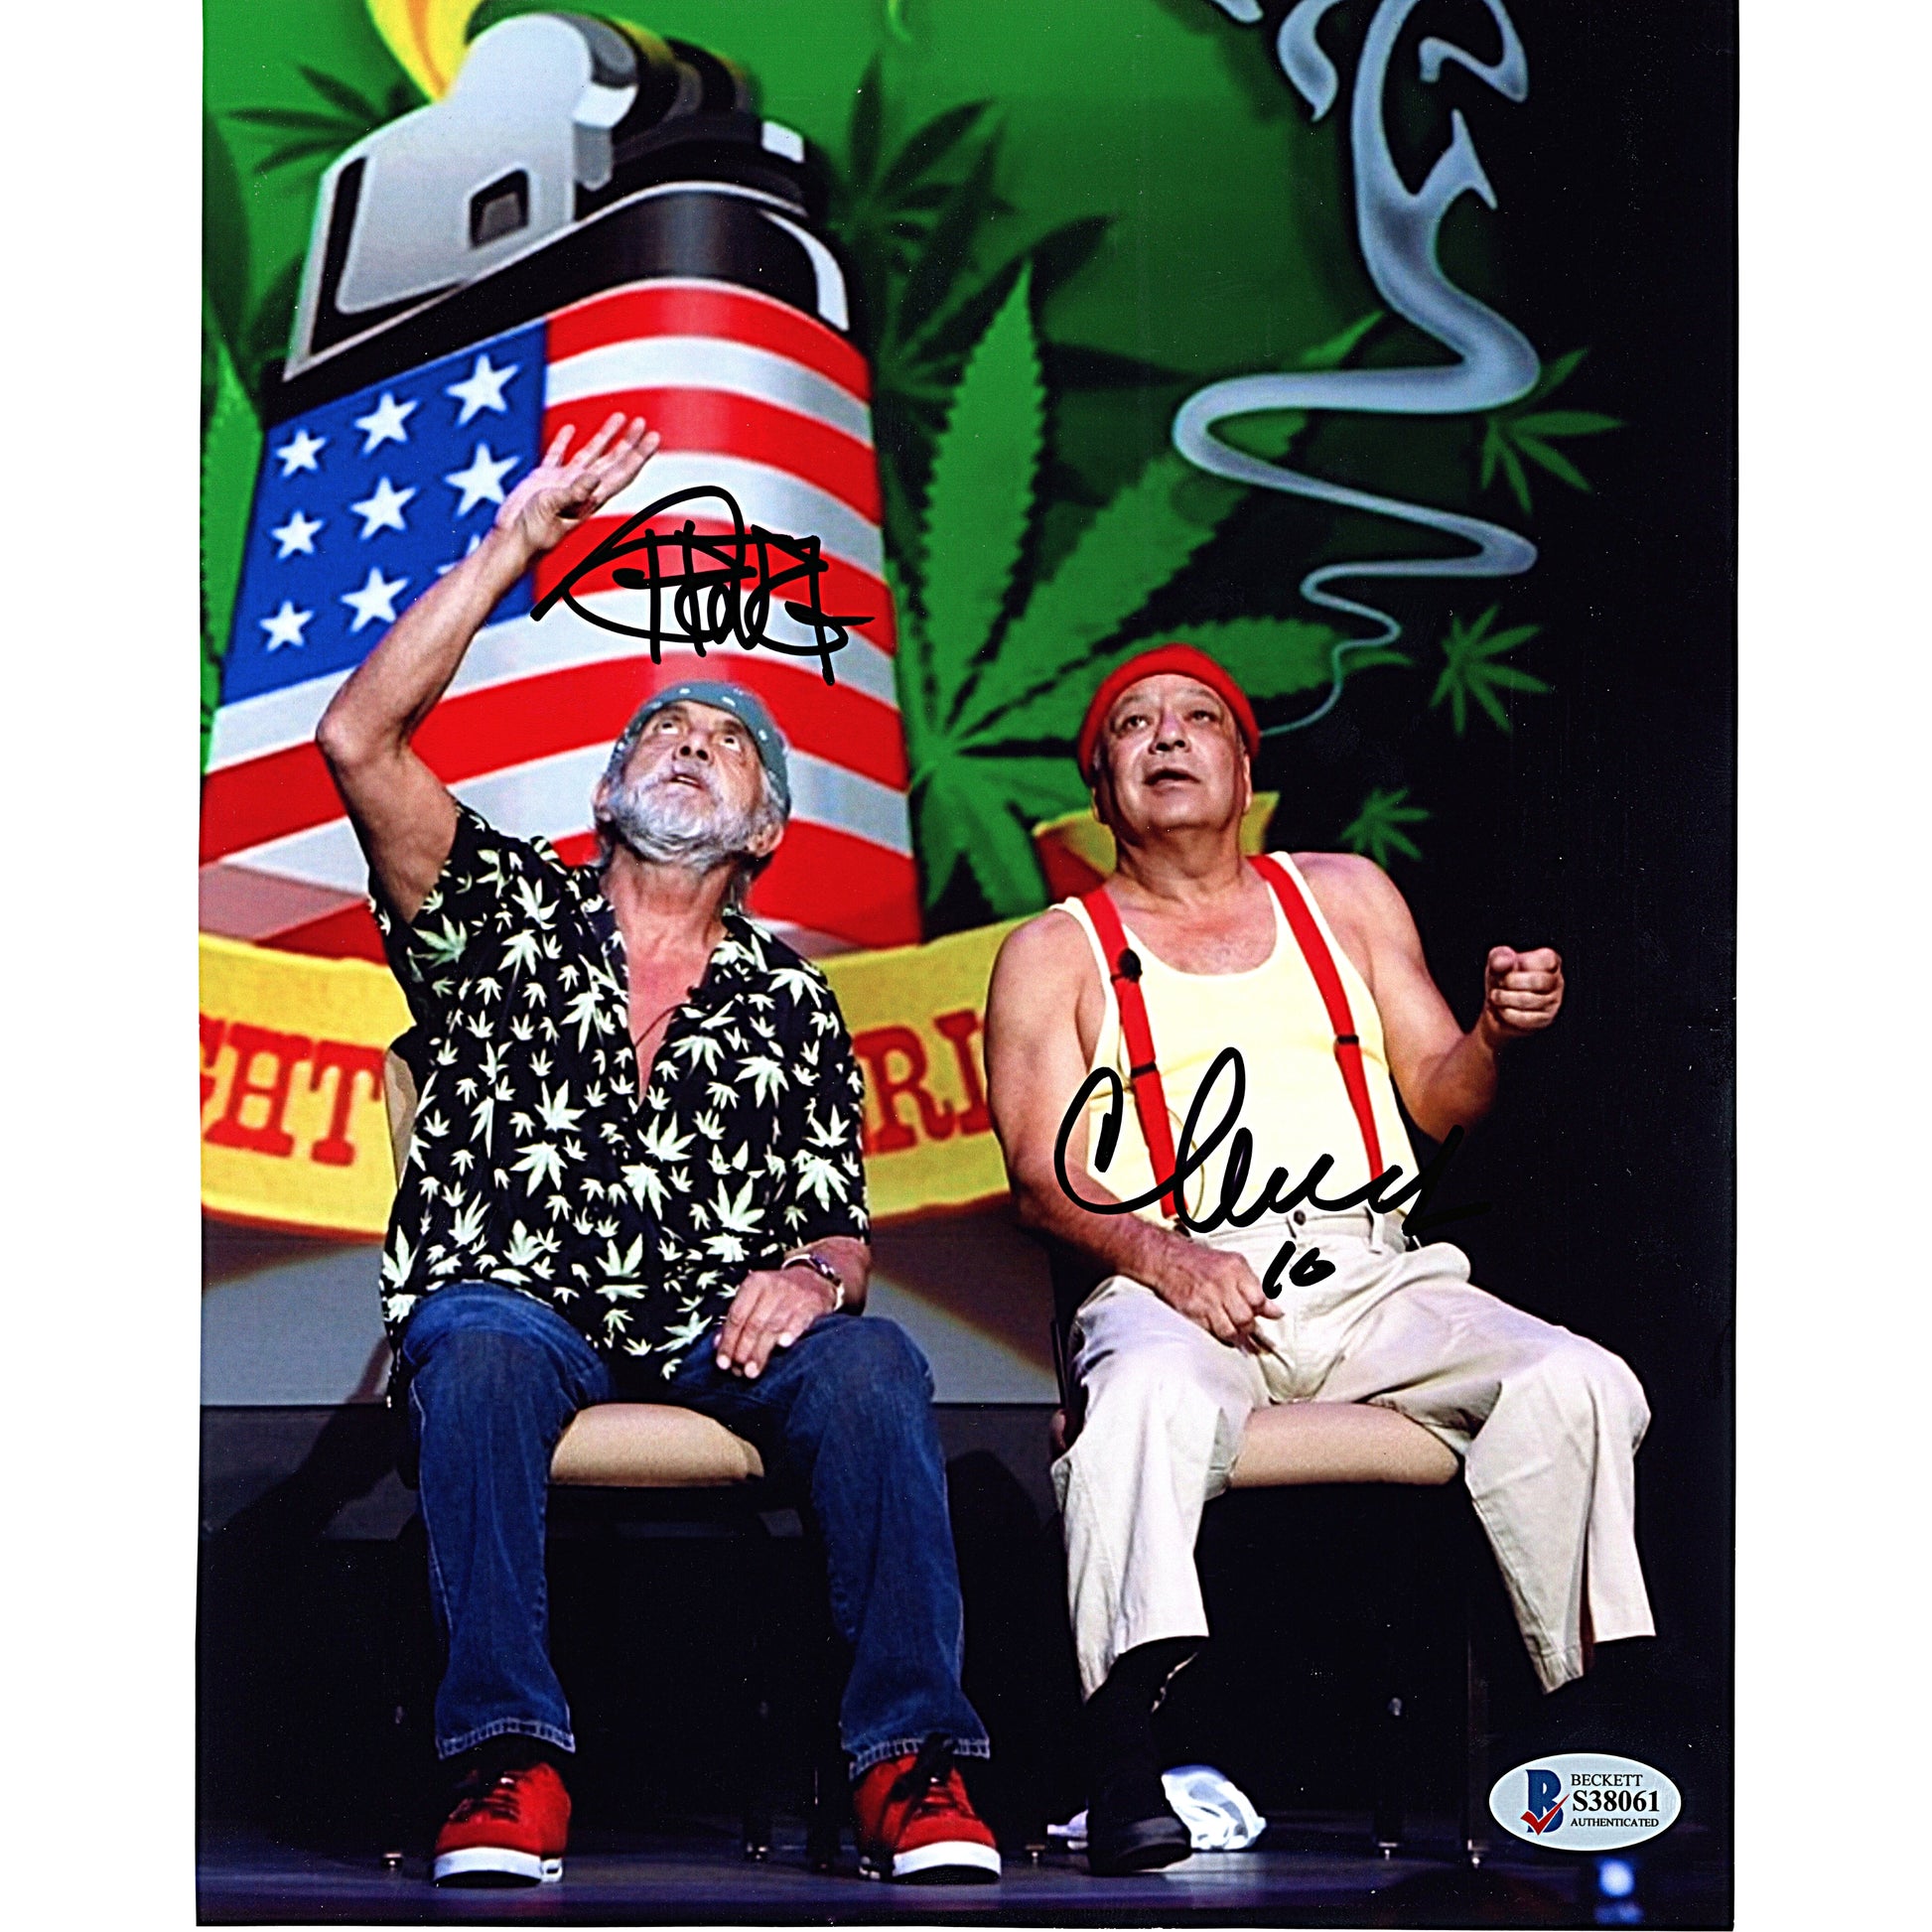 Hollywood- Autographed- Richard Cheech Marin and Tommy Chong Signed Cheech and Chong 8x10 Photograph Beckett Authentication Services BAS S38061 - 102